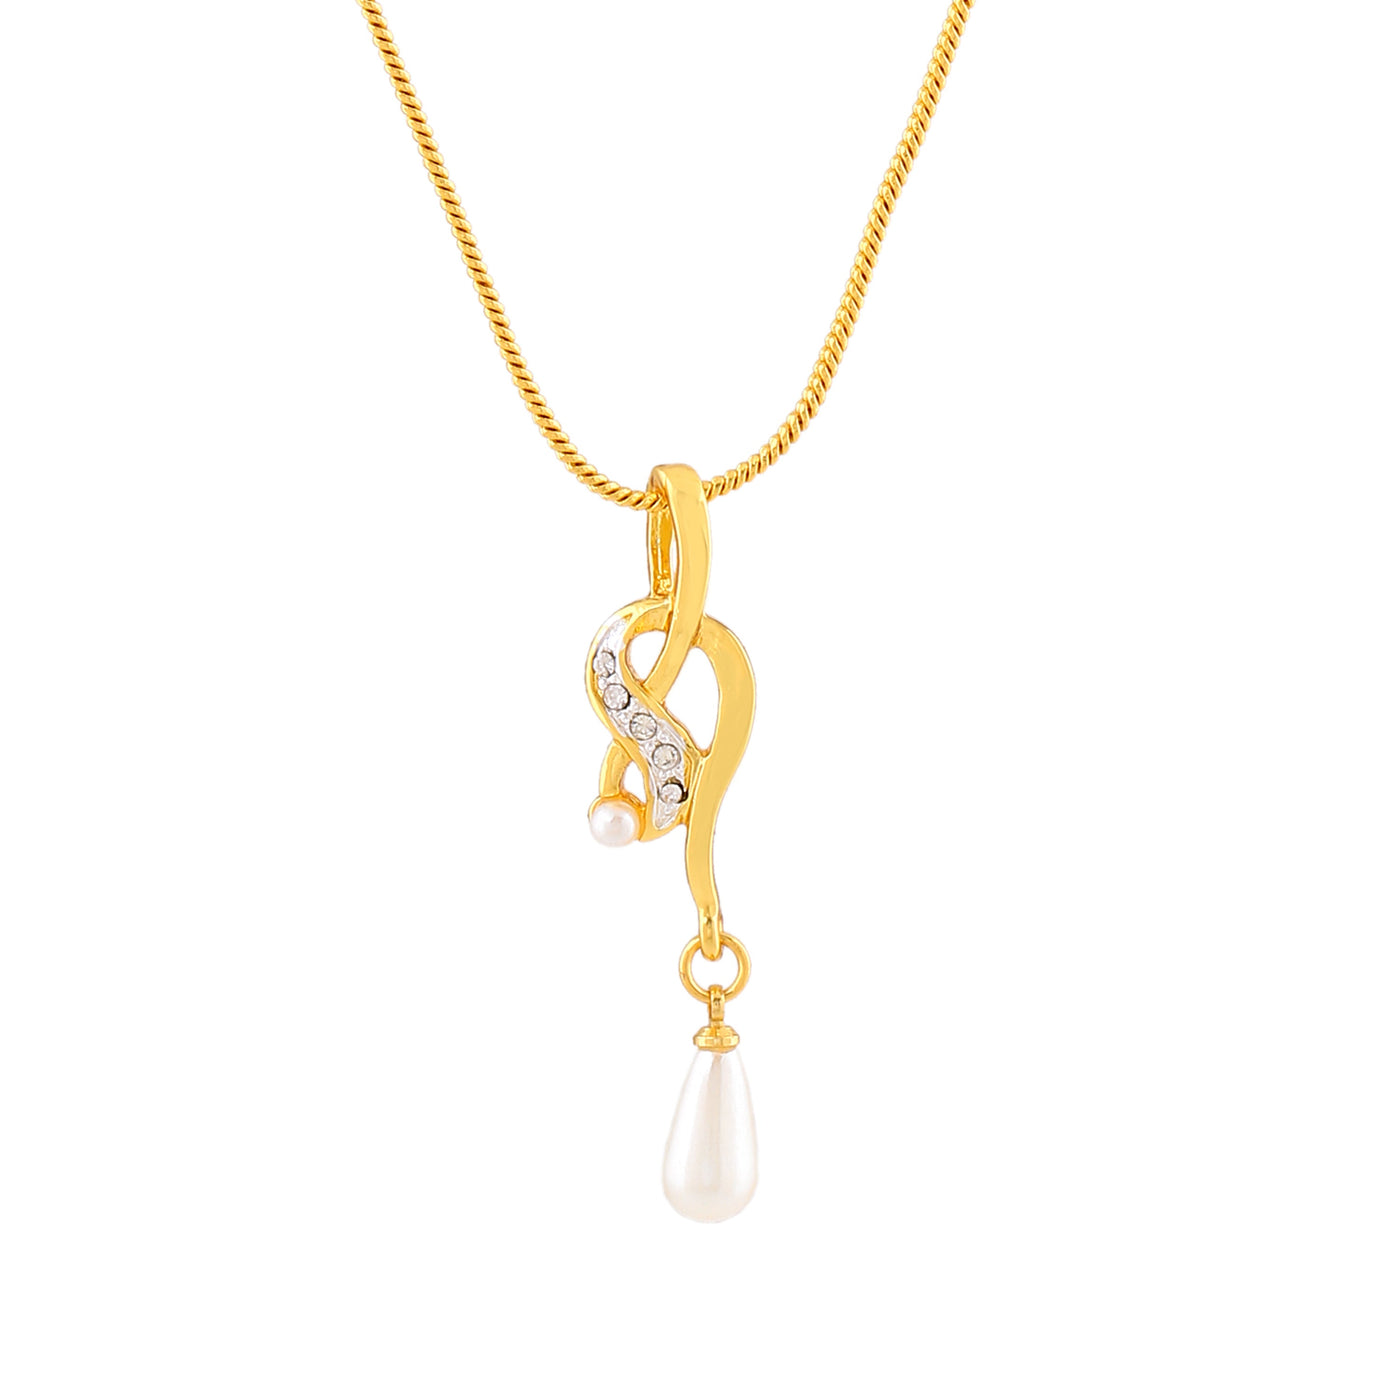 Estele Gold Plated Elegant Pendant with Crystals for Women